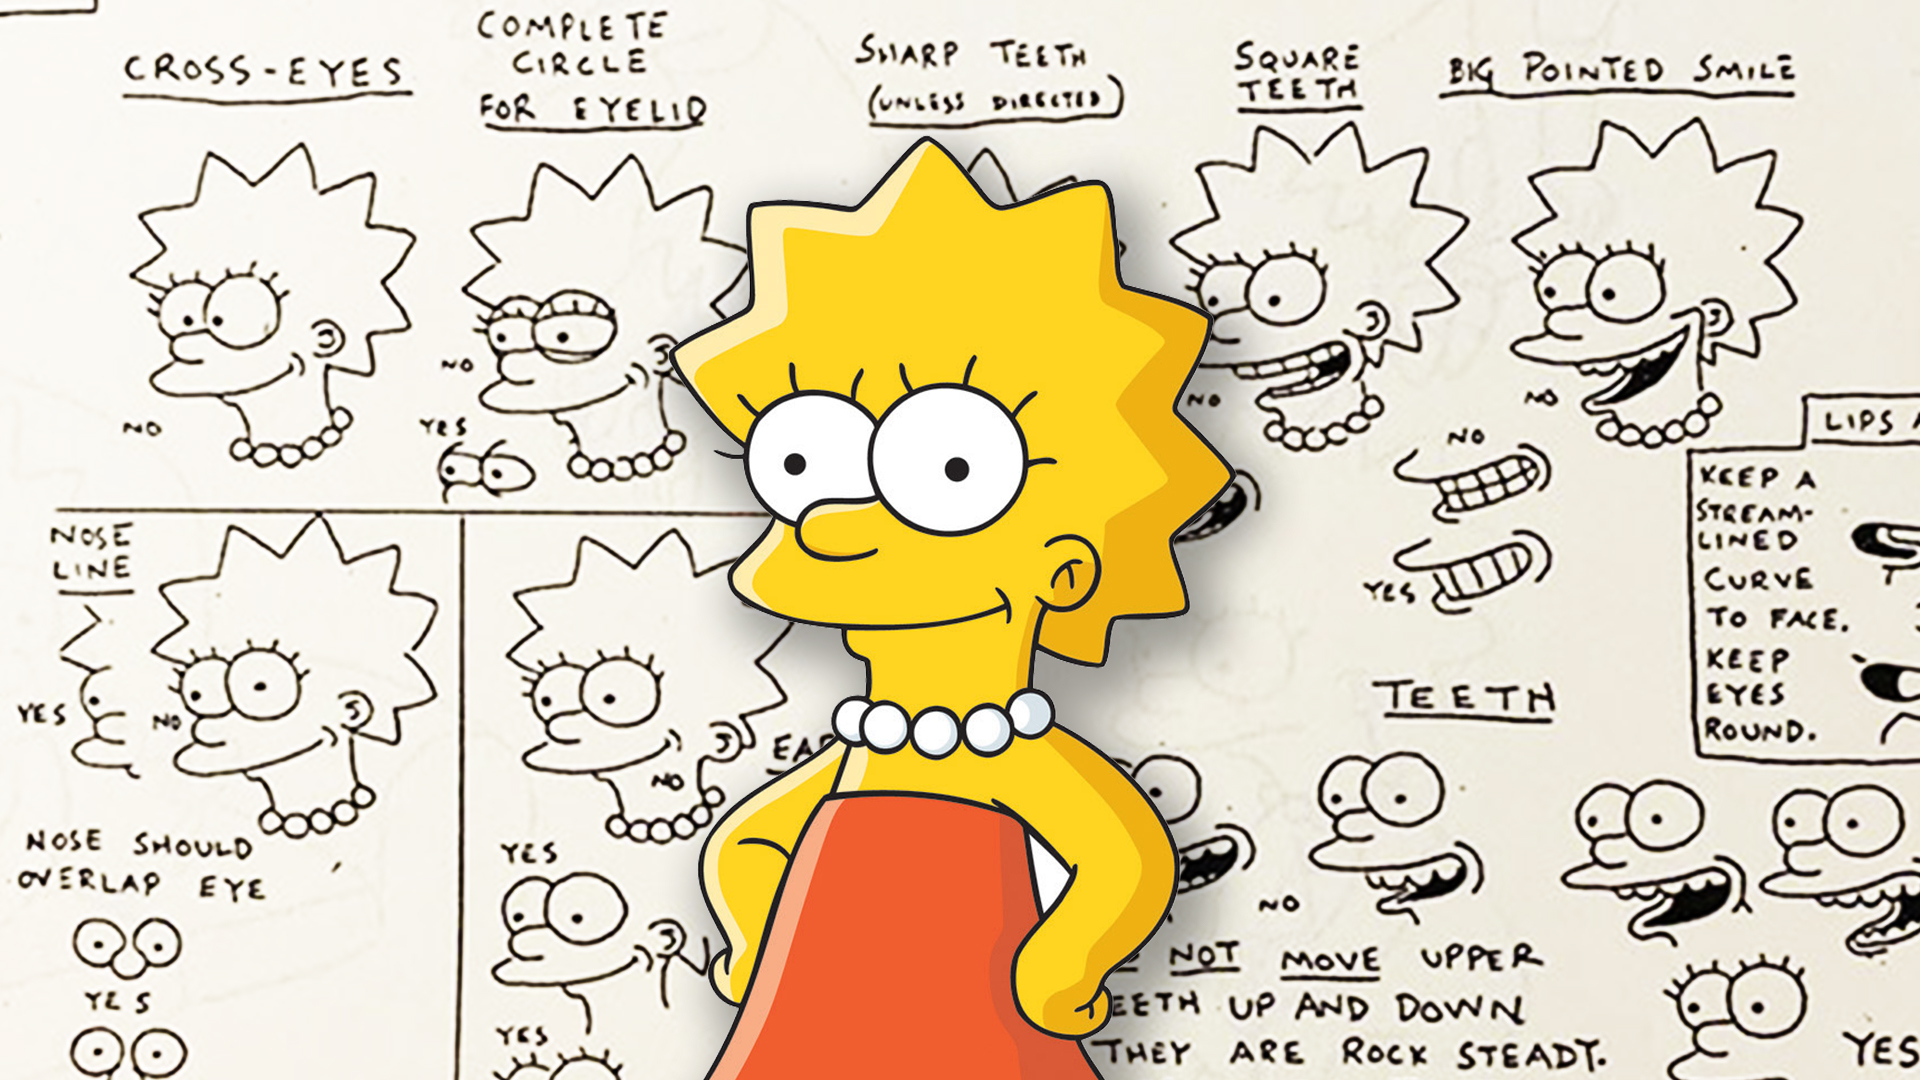 Original The Simpsons style guide reveals fascinating character design  secrets | Creative Bloq